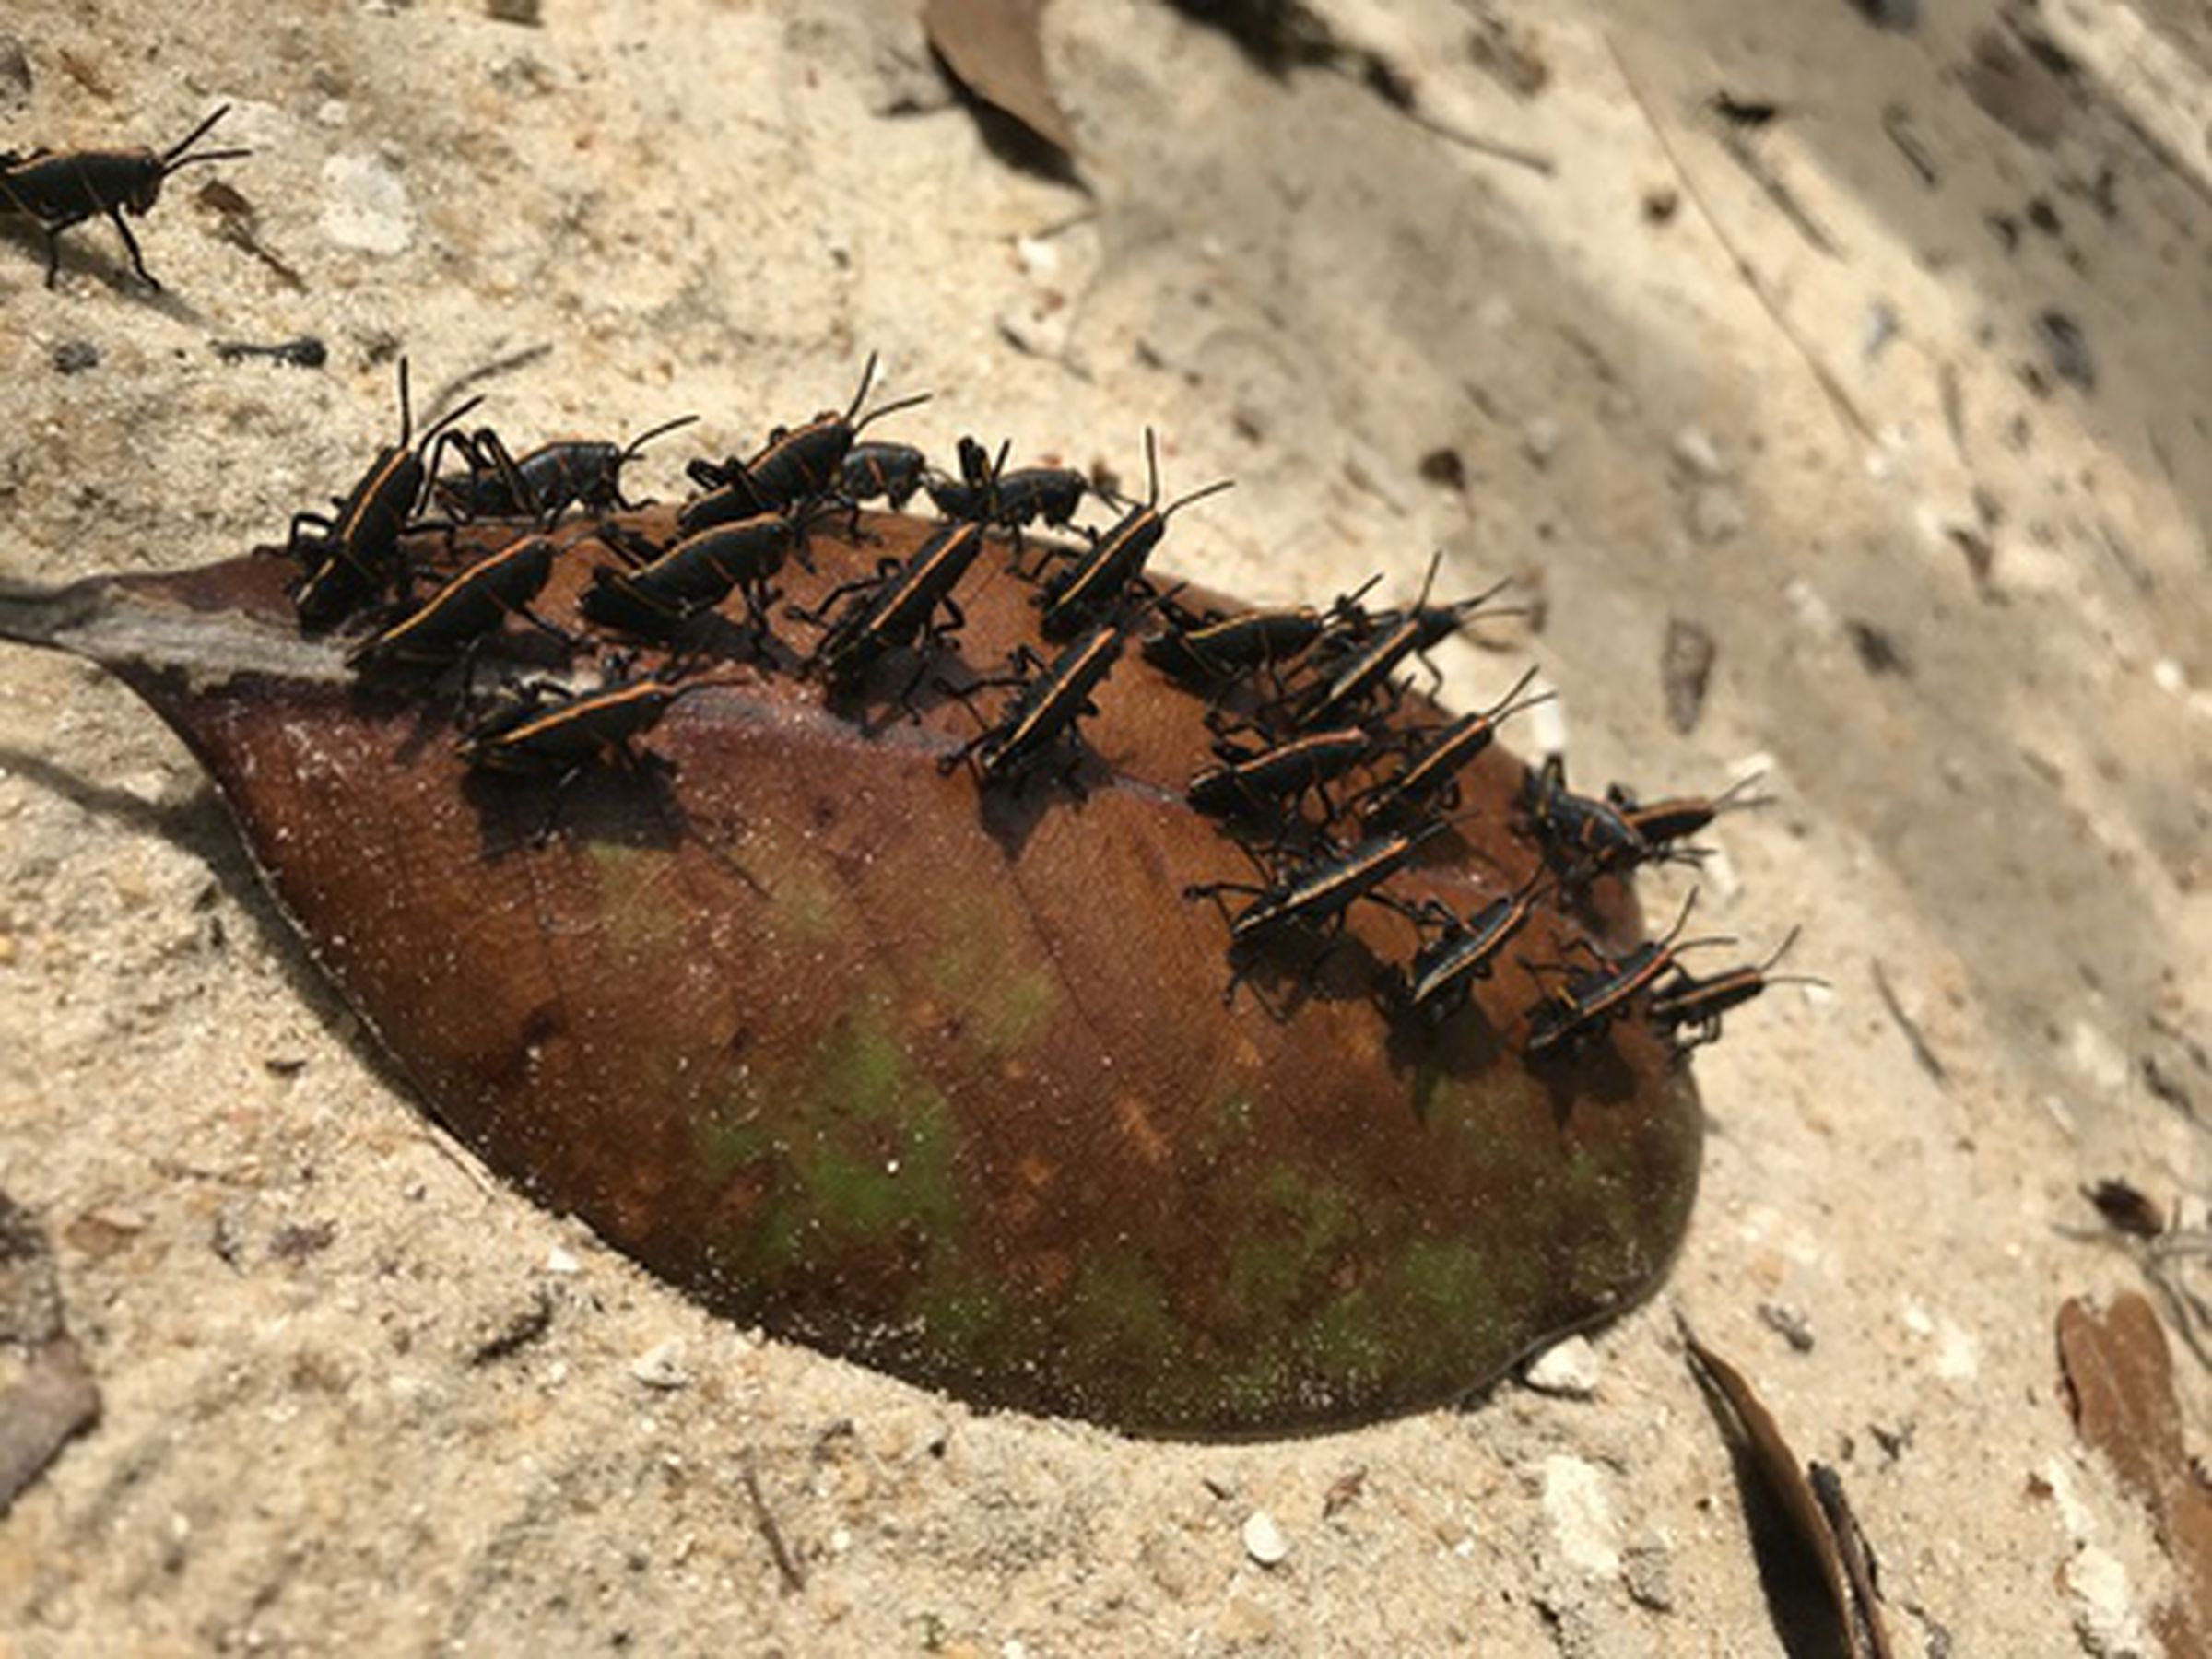 Bugs on a leaf misidentified as a “shipwreck.” 